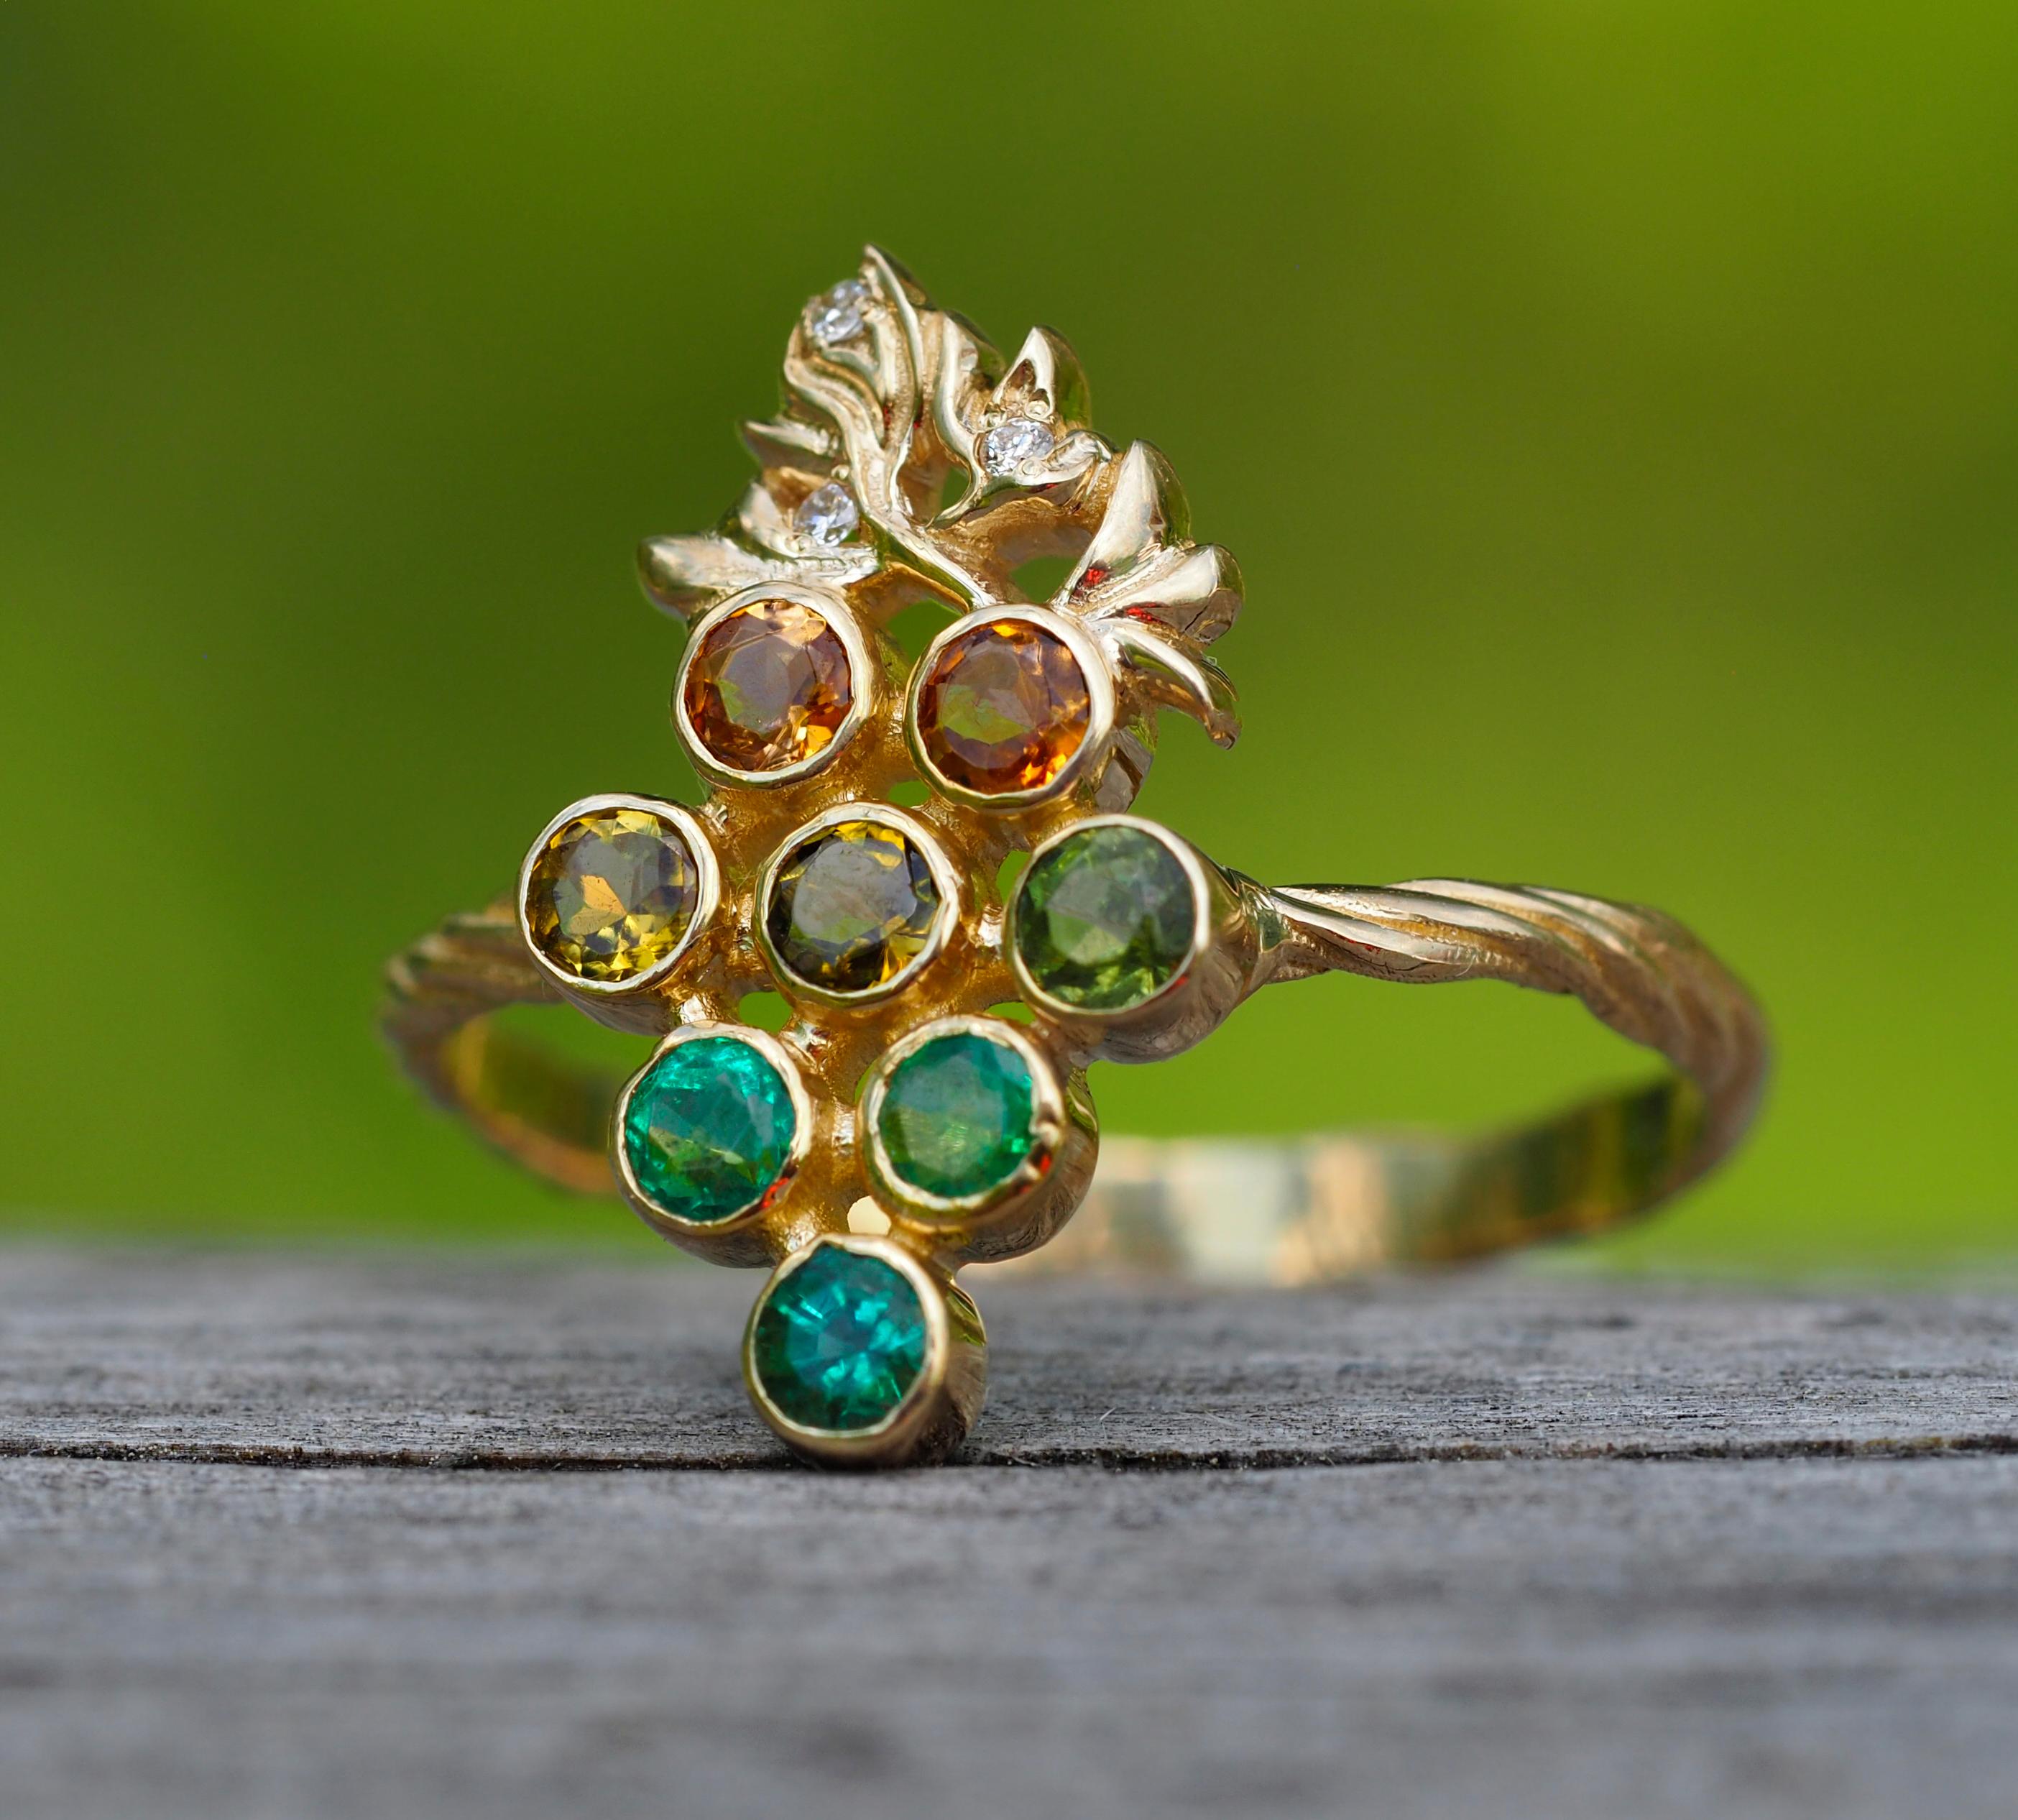 Gold grape ring with tourmalines. 
Multicolor tourmaline 14k gold ring. Autumn ring. Vine Leaves Ring. Gold fertility ring. Summer vine ring.

Weight: 1.95 g. depends from size
Gold - 14k gold.

Tourmalines: 6 pieces, 0.38 ct total
Cut: Round
Color